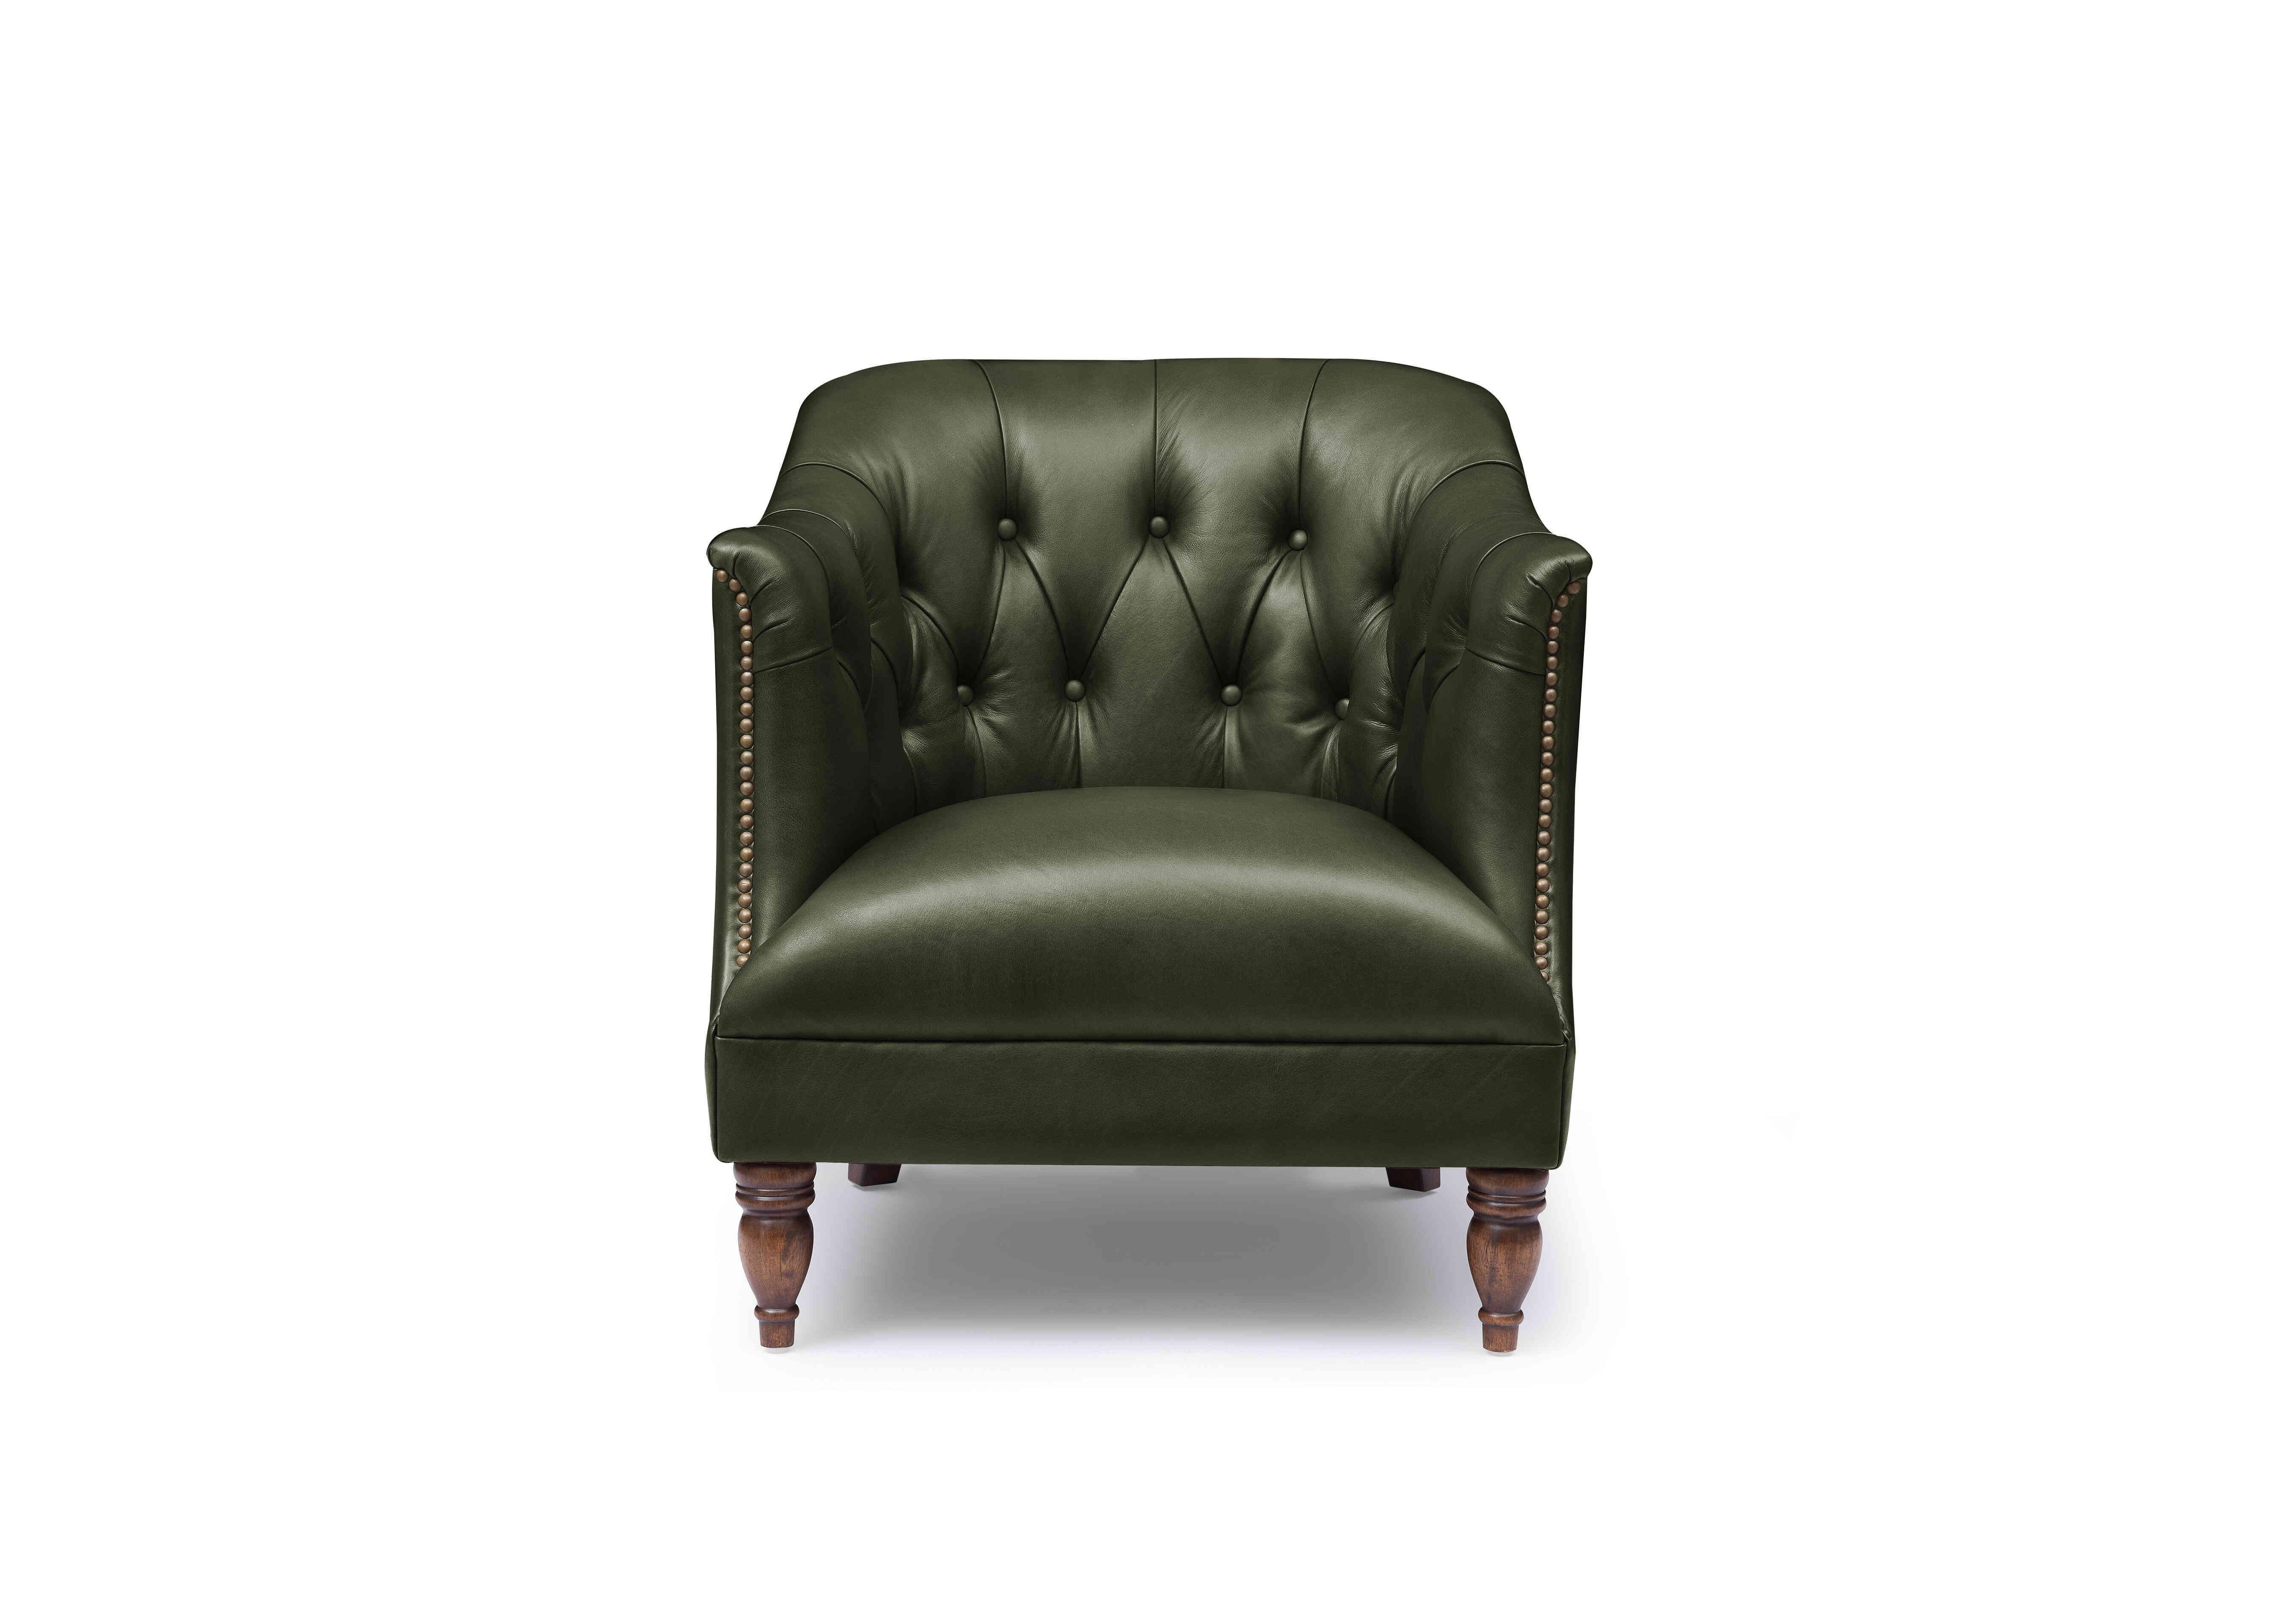 Henson Leather Tub Chair in X3y1-1965ls Emerald on Furniture Village